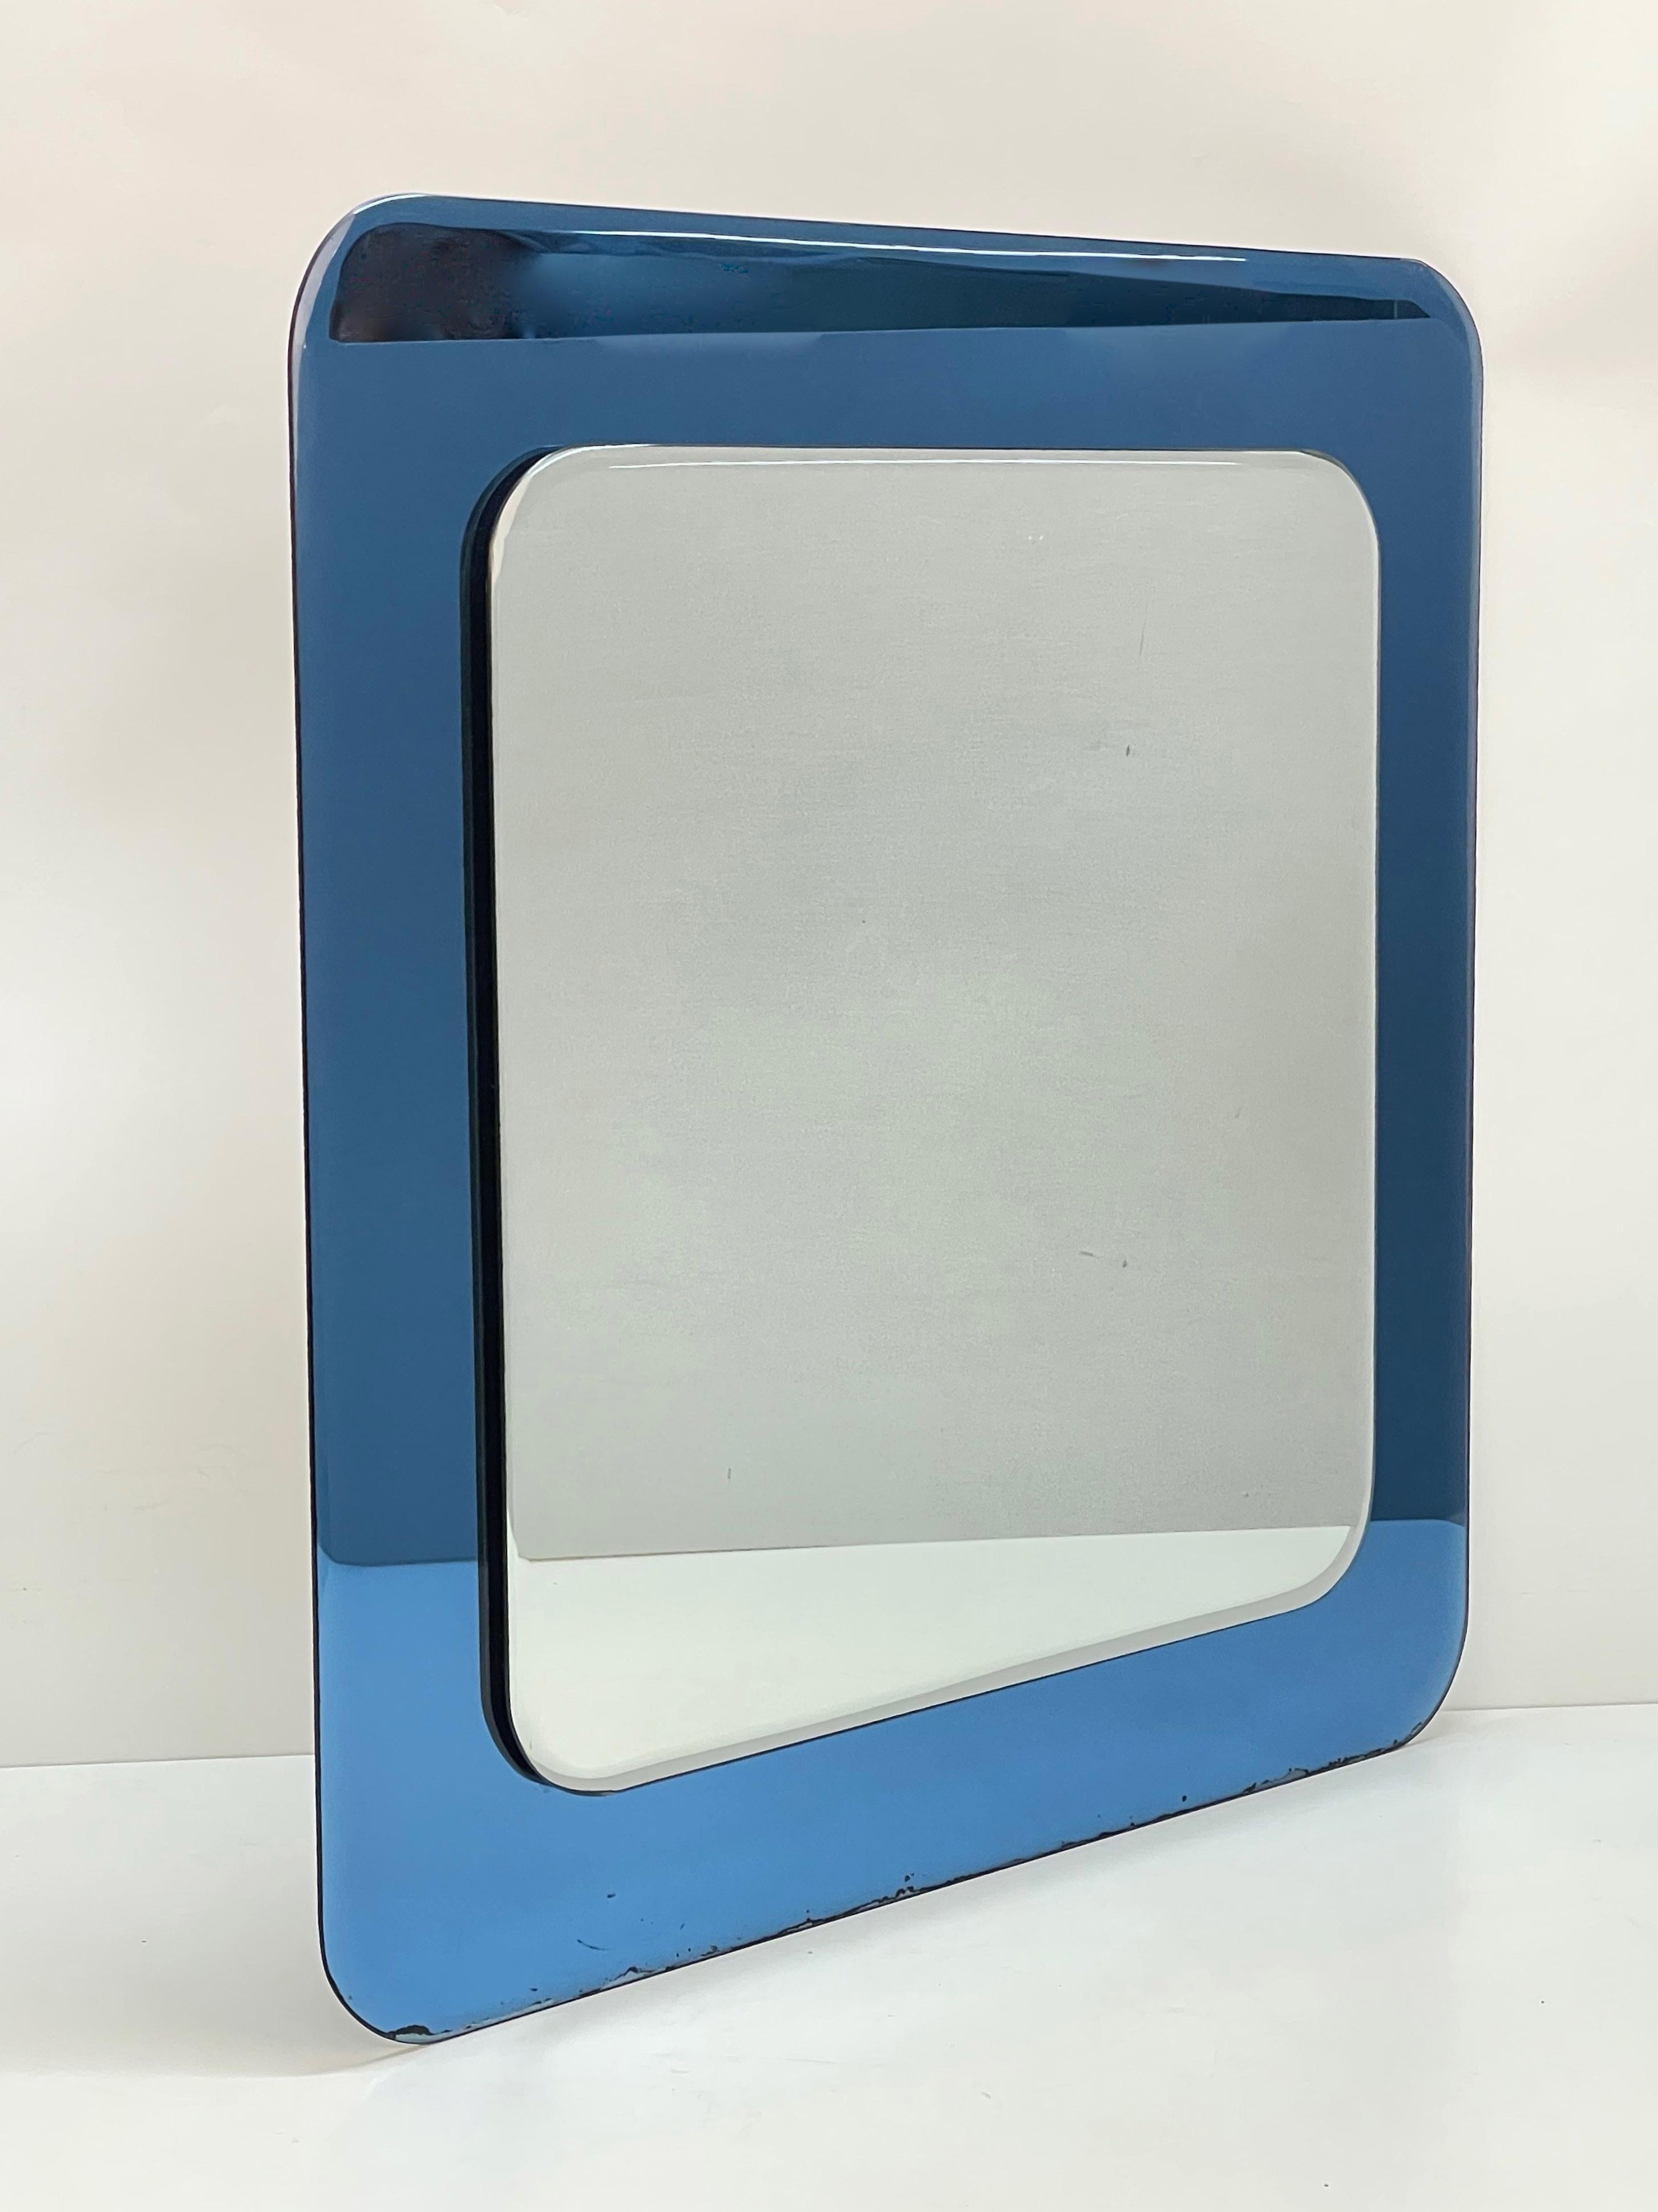 Midcentury Cristal Art Square Italian Wall Mirror with Blue Glass Frame, 1960s For Sale 5